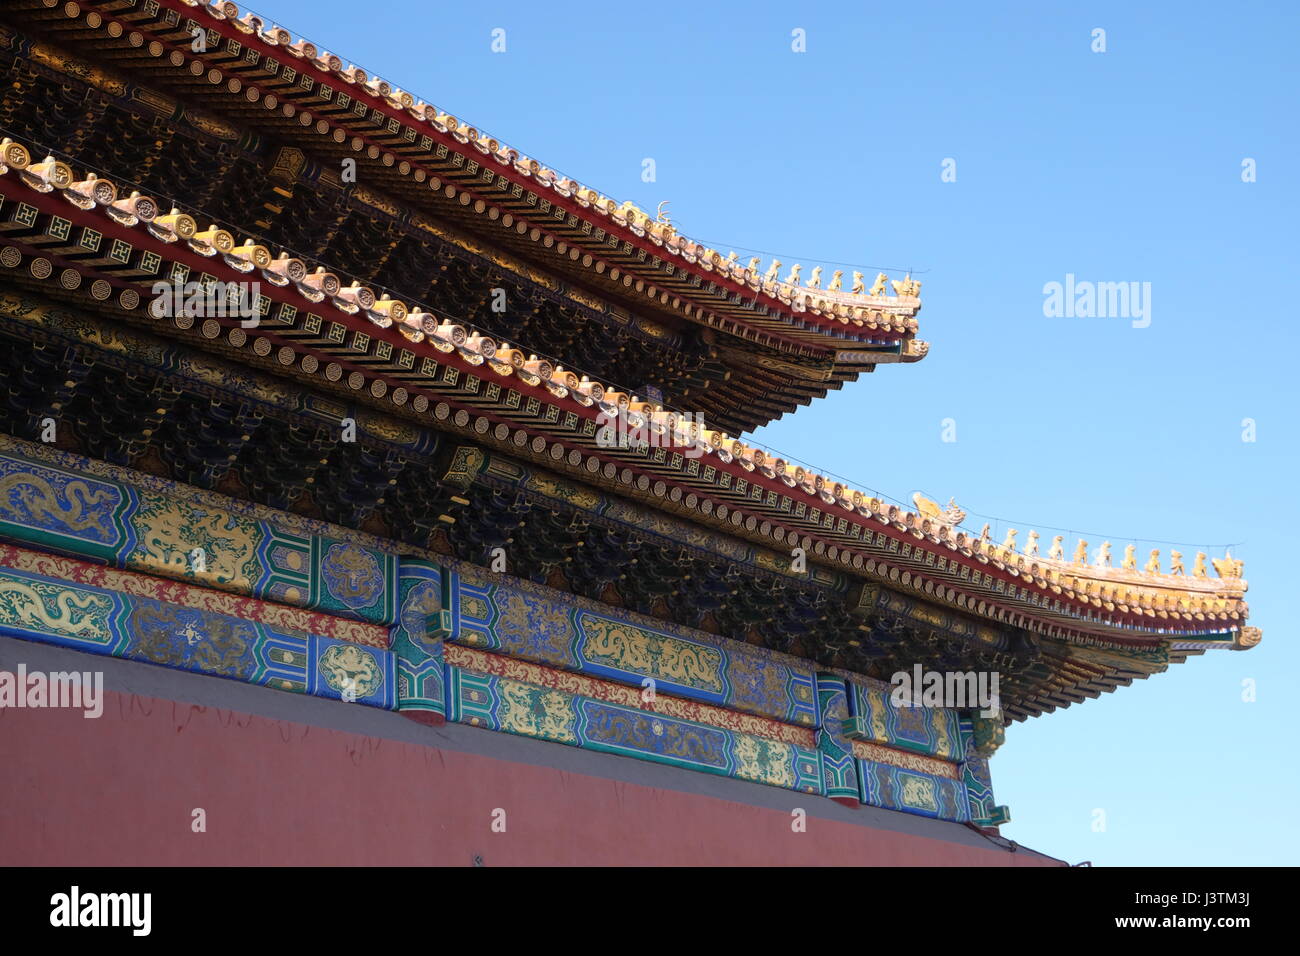 Tiled roof and facade decorated with a Chinese pattern. Palace in The Forbidden City, Beijing, China, February 23, 2016. Stock Photo